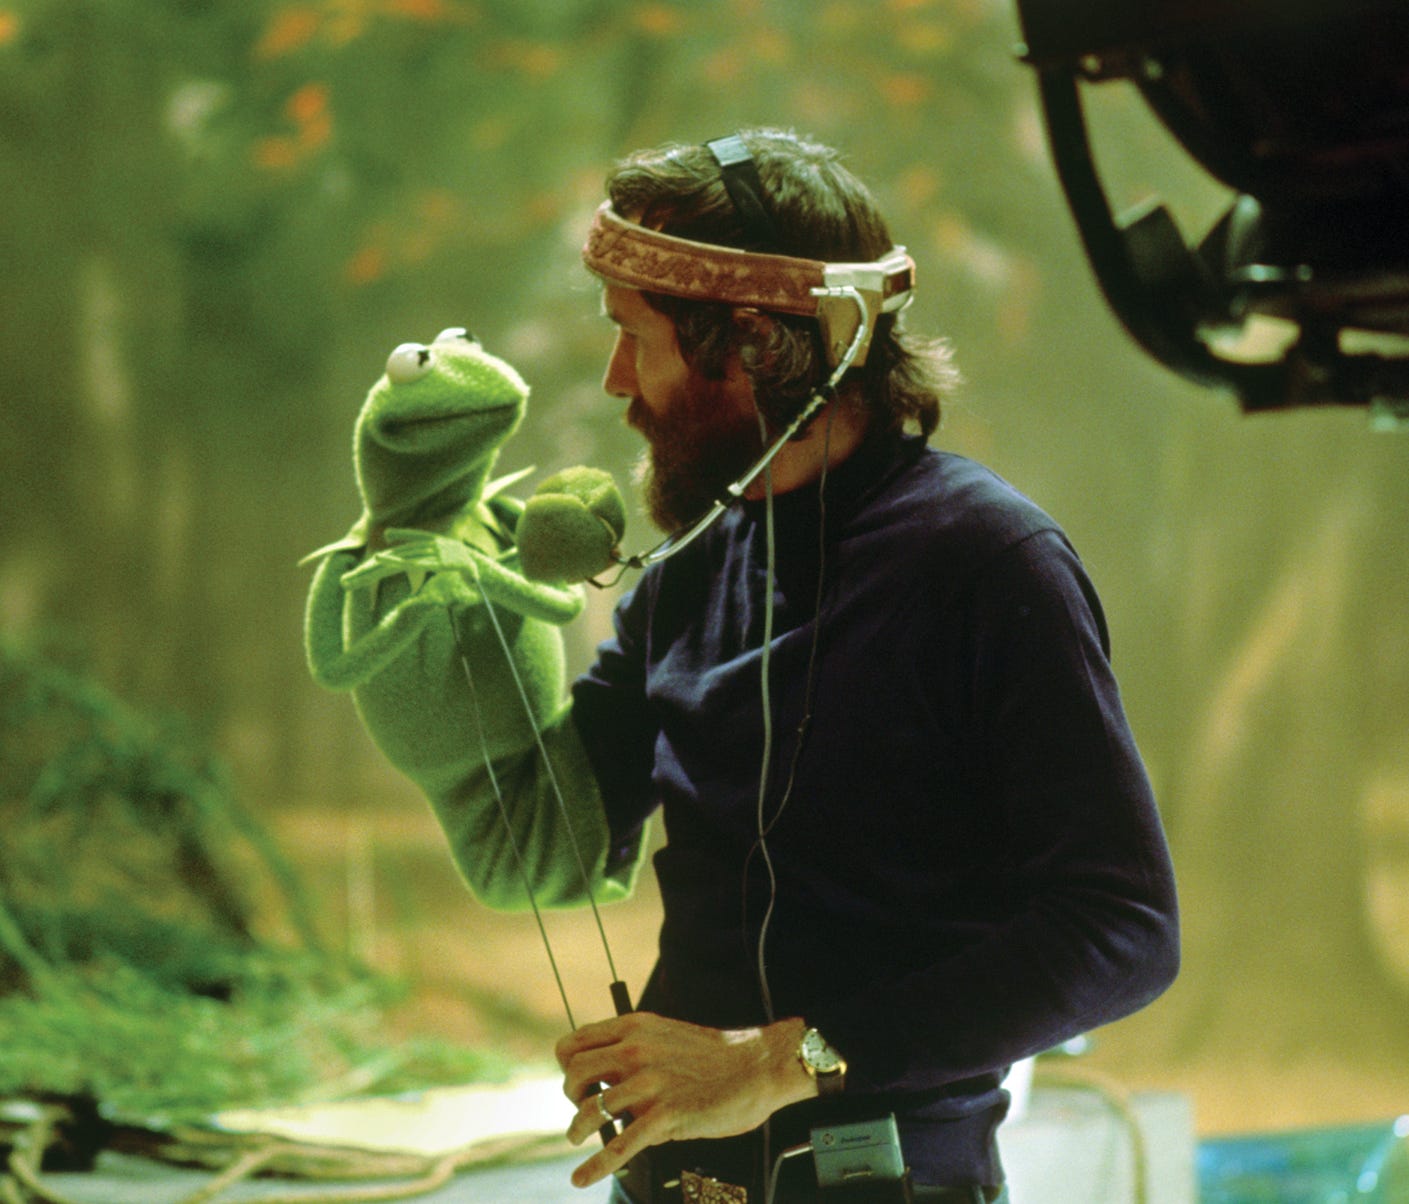 New York City's Museum of the Moving Image pays tribute to Jim Henson's groundbreaking work in a new, permanent exhibit.